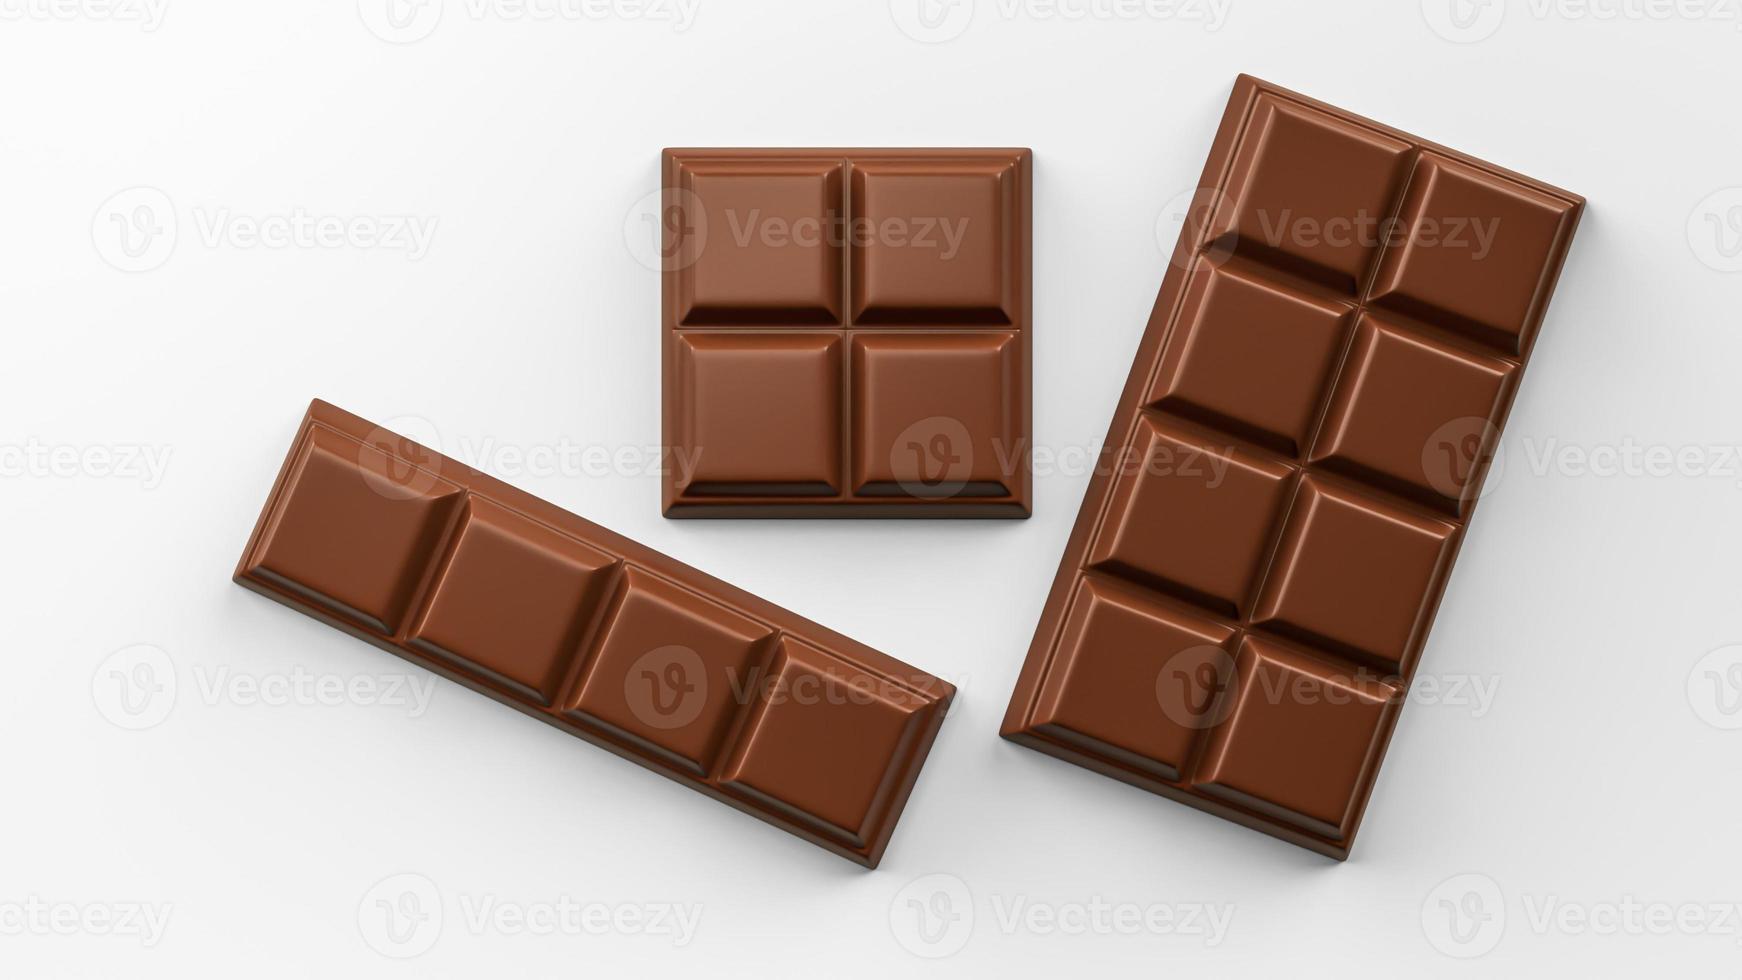 121 M&m's Chocolate Bar Images, Stock Photos, 3D objects, & Vectors